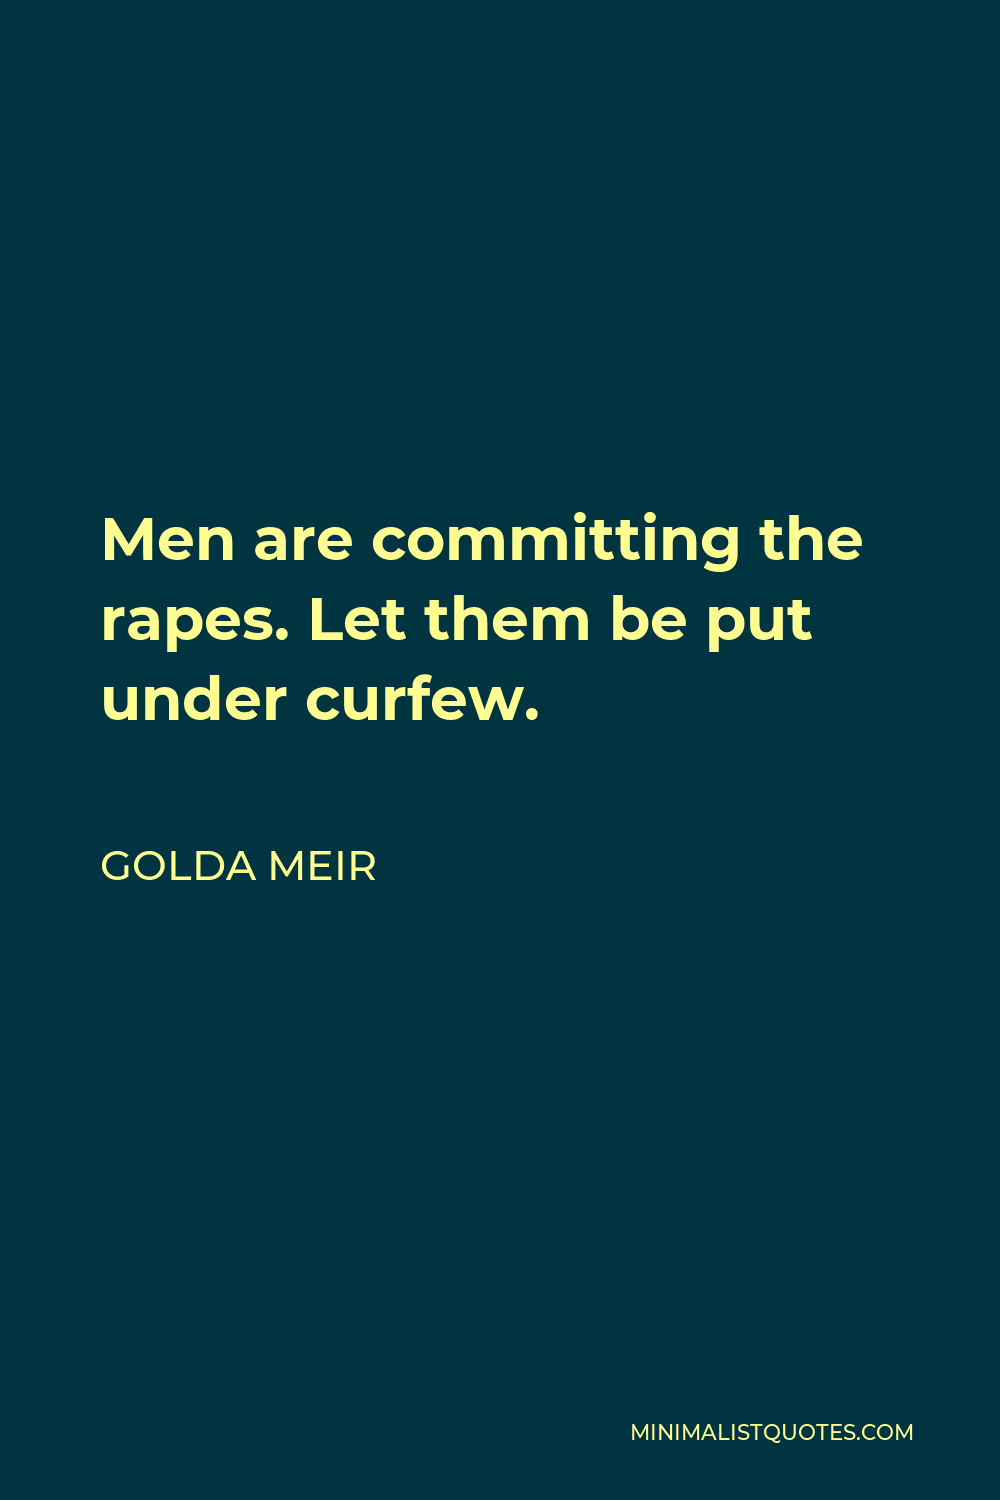 Golda Meir Quote - Men are committing the rapes. Let them be put under curfew.